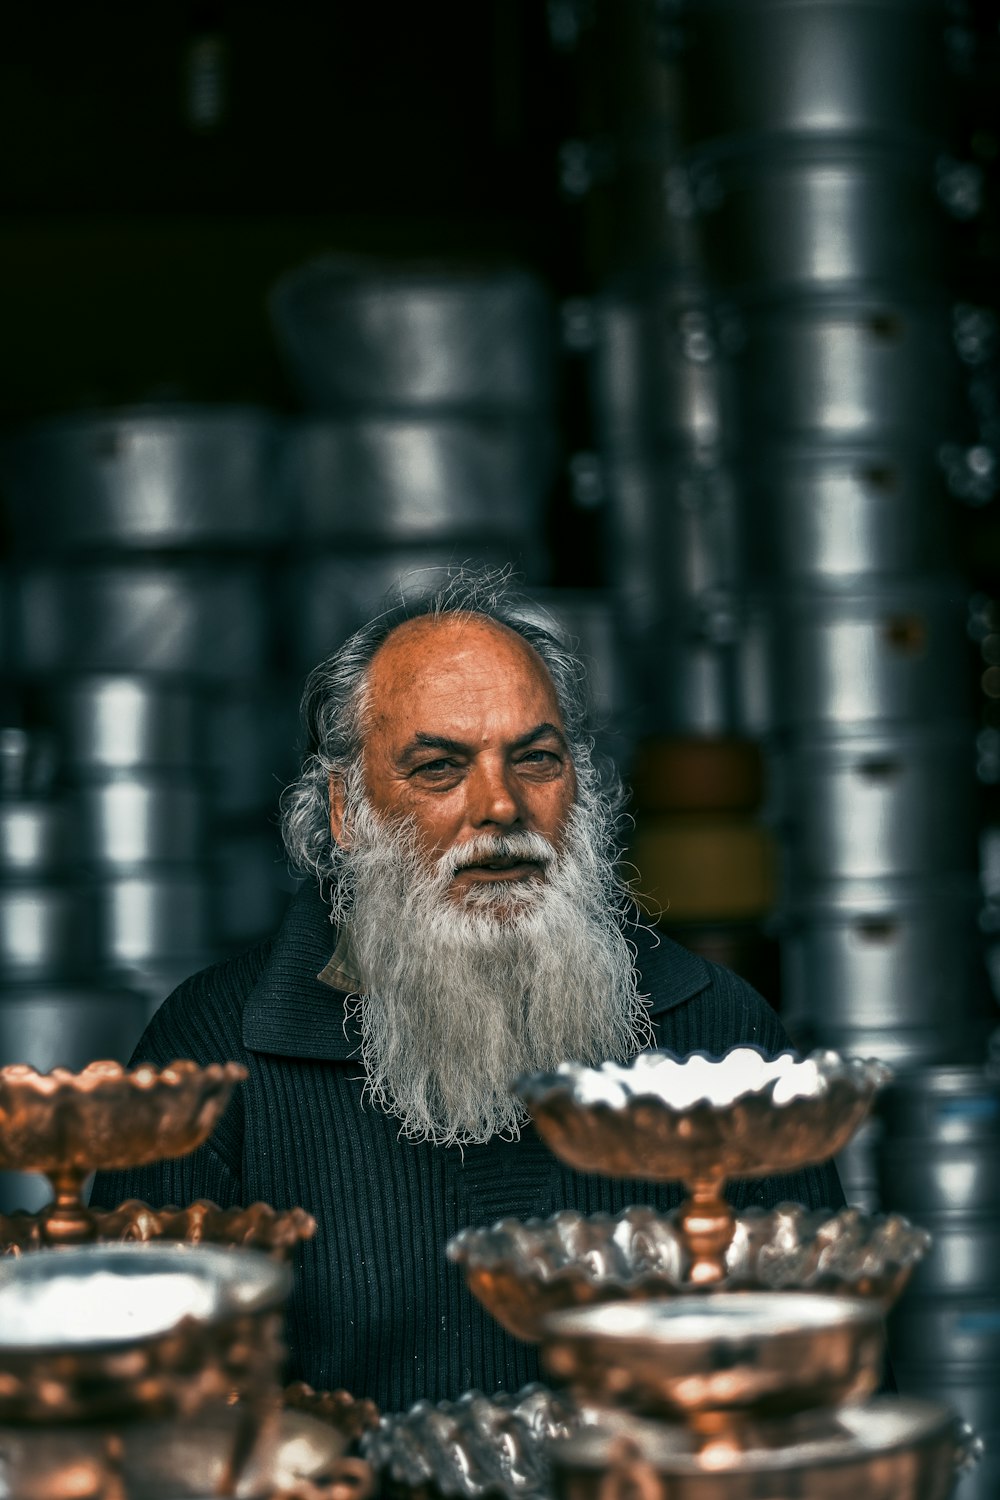 man beside gray stainless steel cooking pots and racks